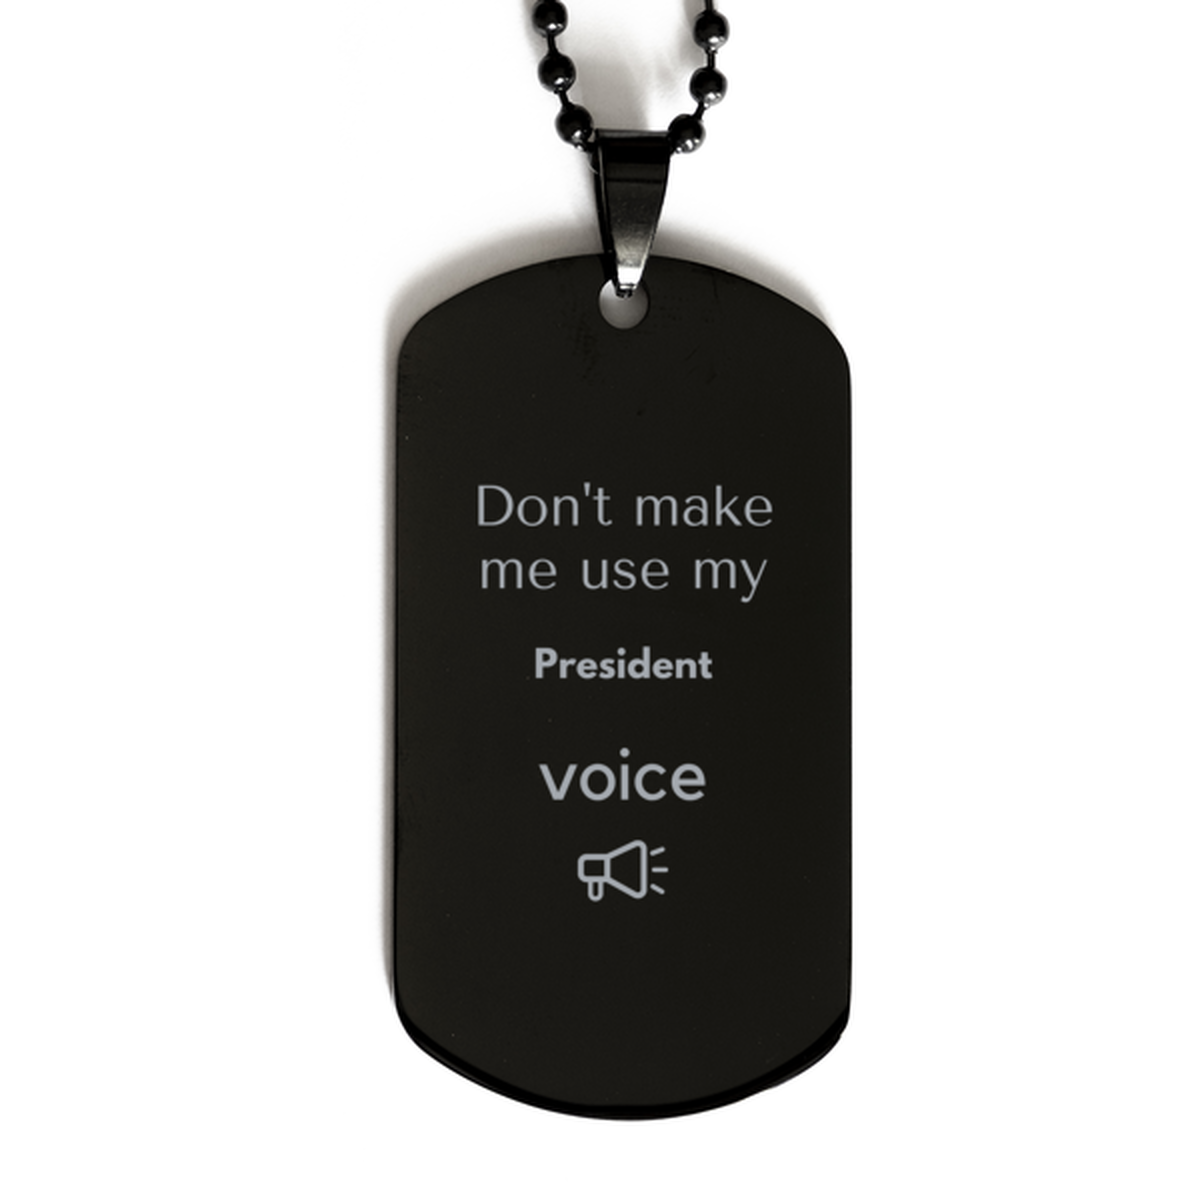 Don't make me use my President voice, Sarcasm President Gifts, Christmas President Black Dog Tag Birthday Unique Gifts For President Coworkers, Men, Women, Colleague, Friends